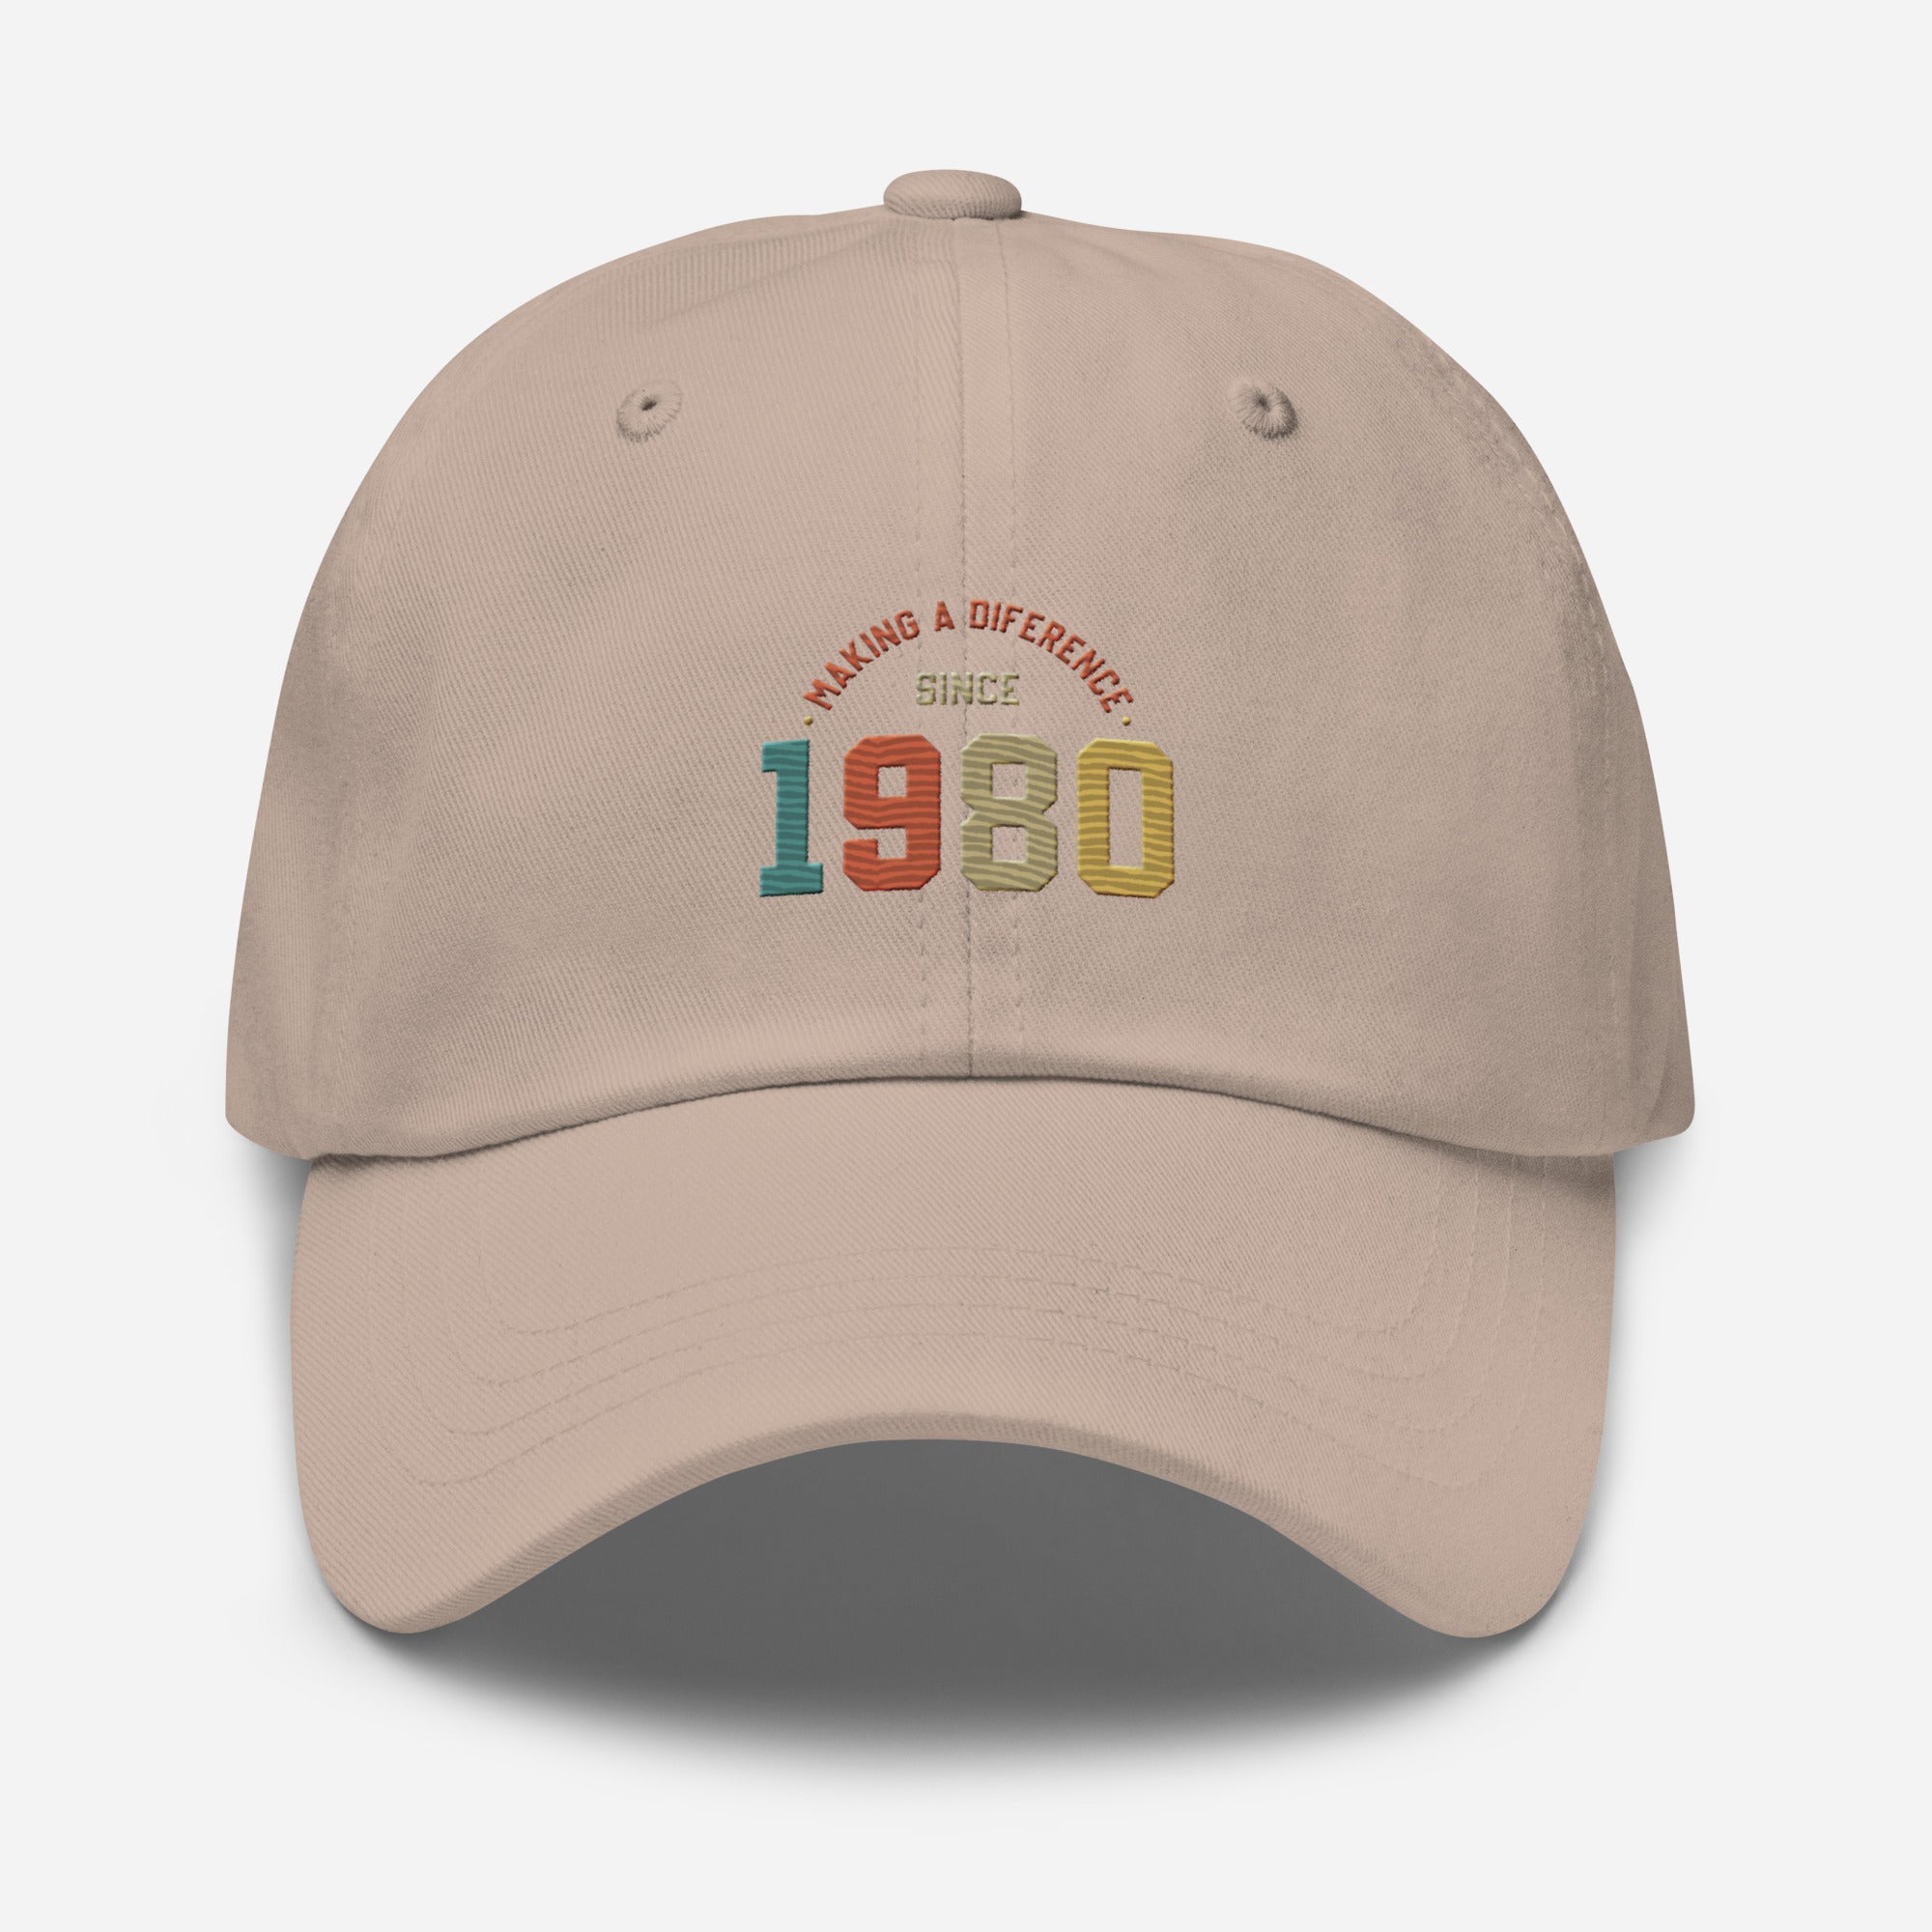 Hat | Making a diference since 1980